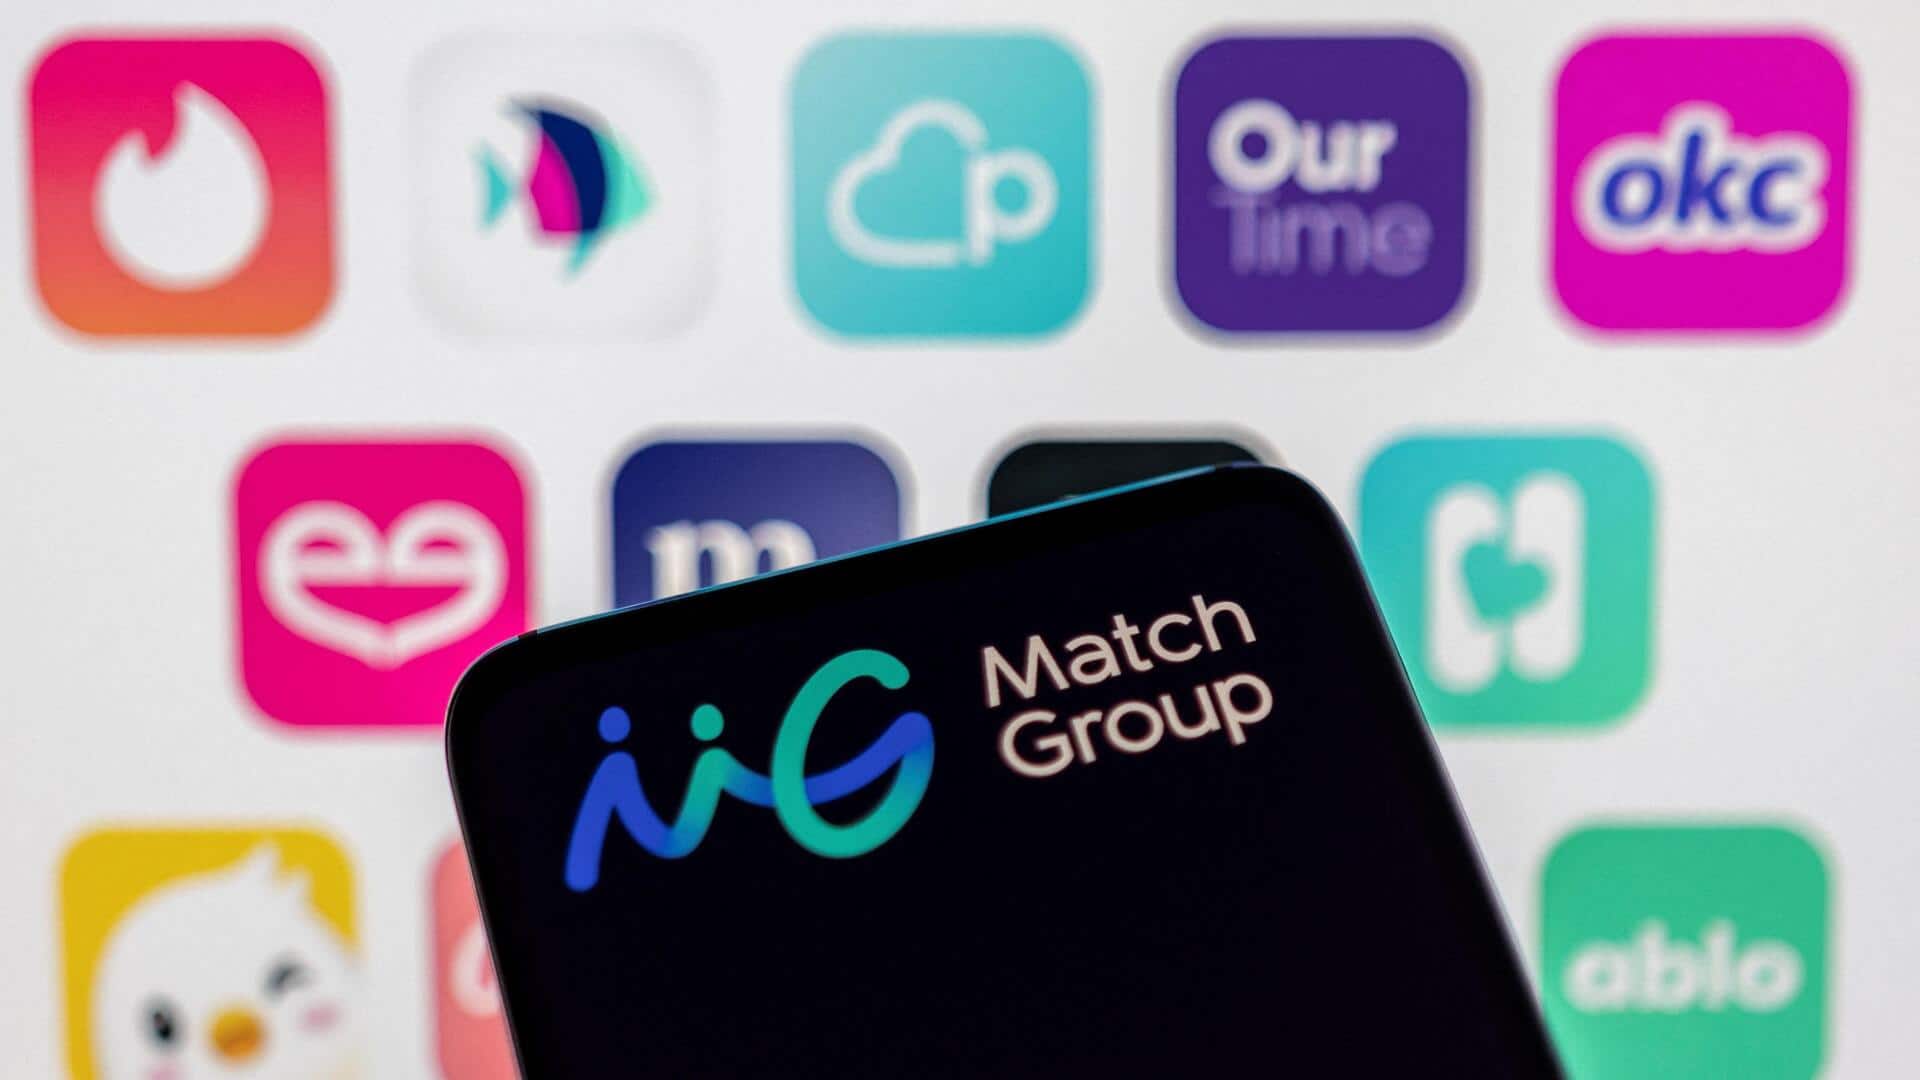 Match Group's Tinder, Hinge dating apps are addictive, says lawsuit